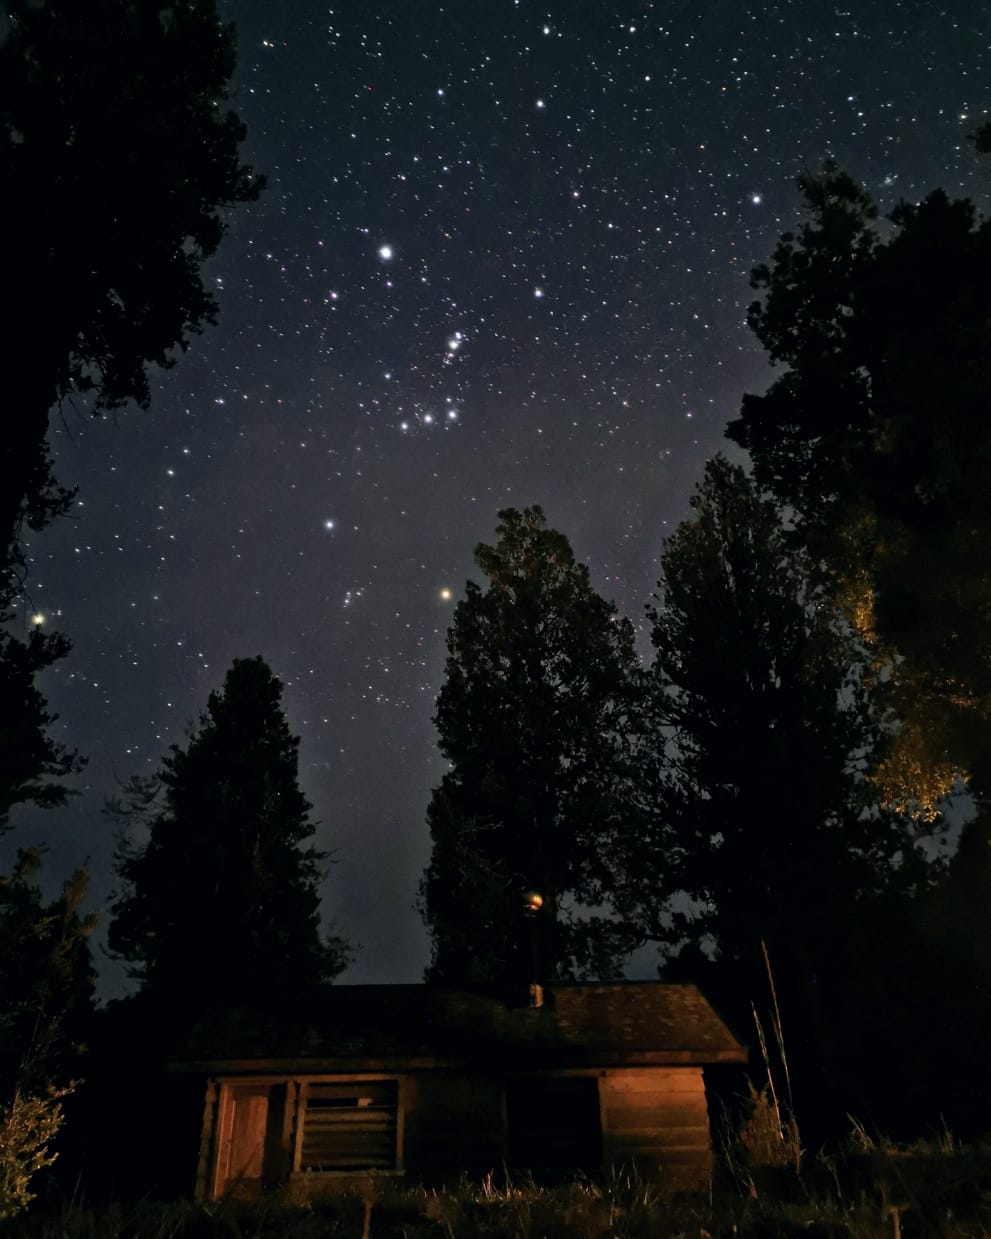 the night sky over a cabin in the woods.